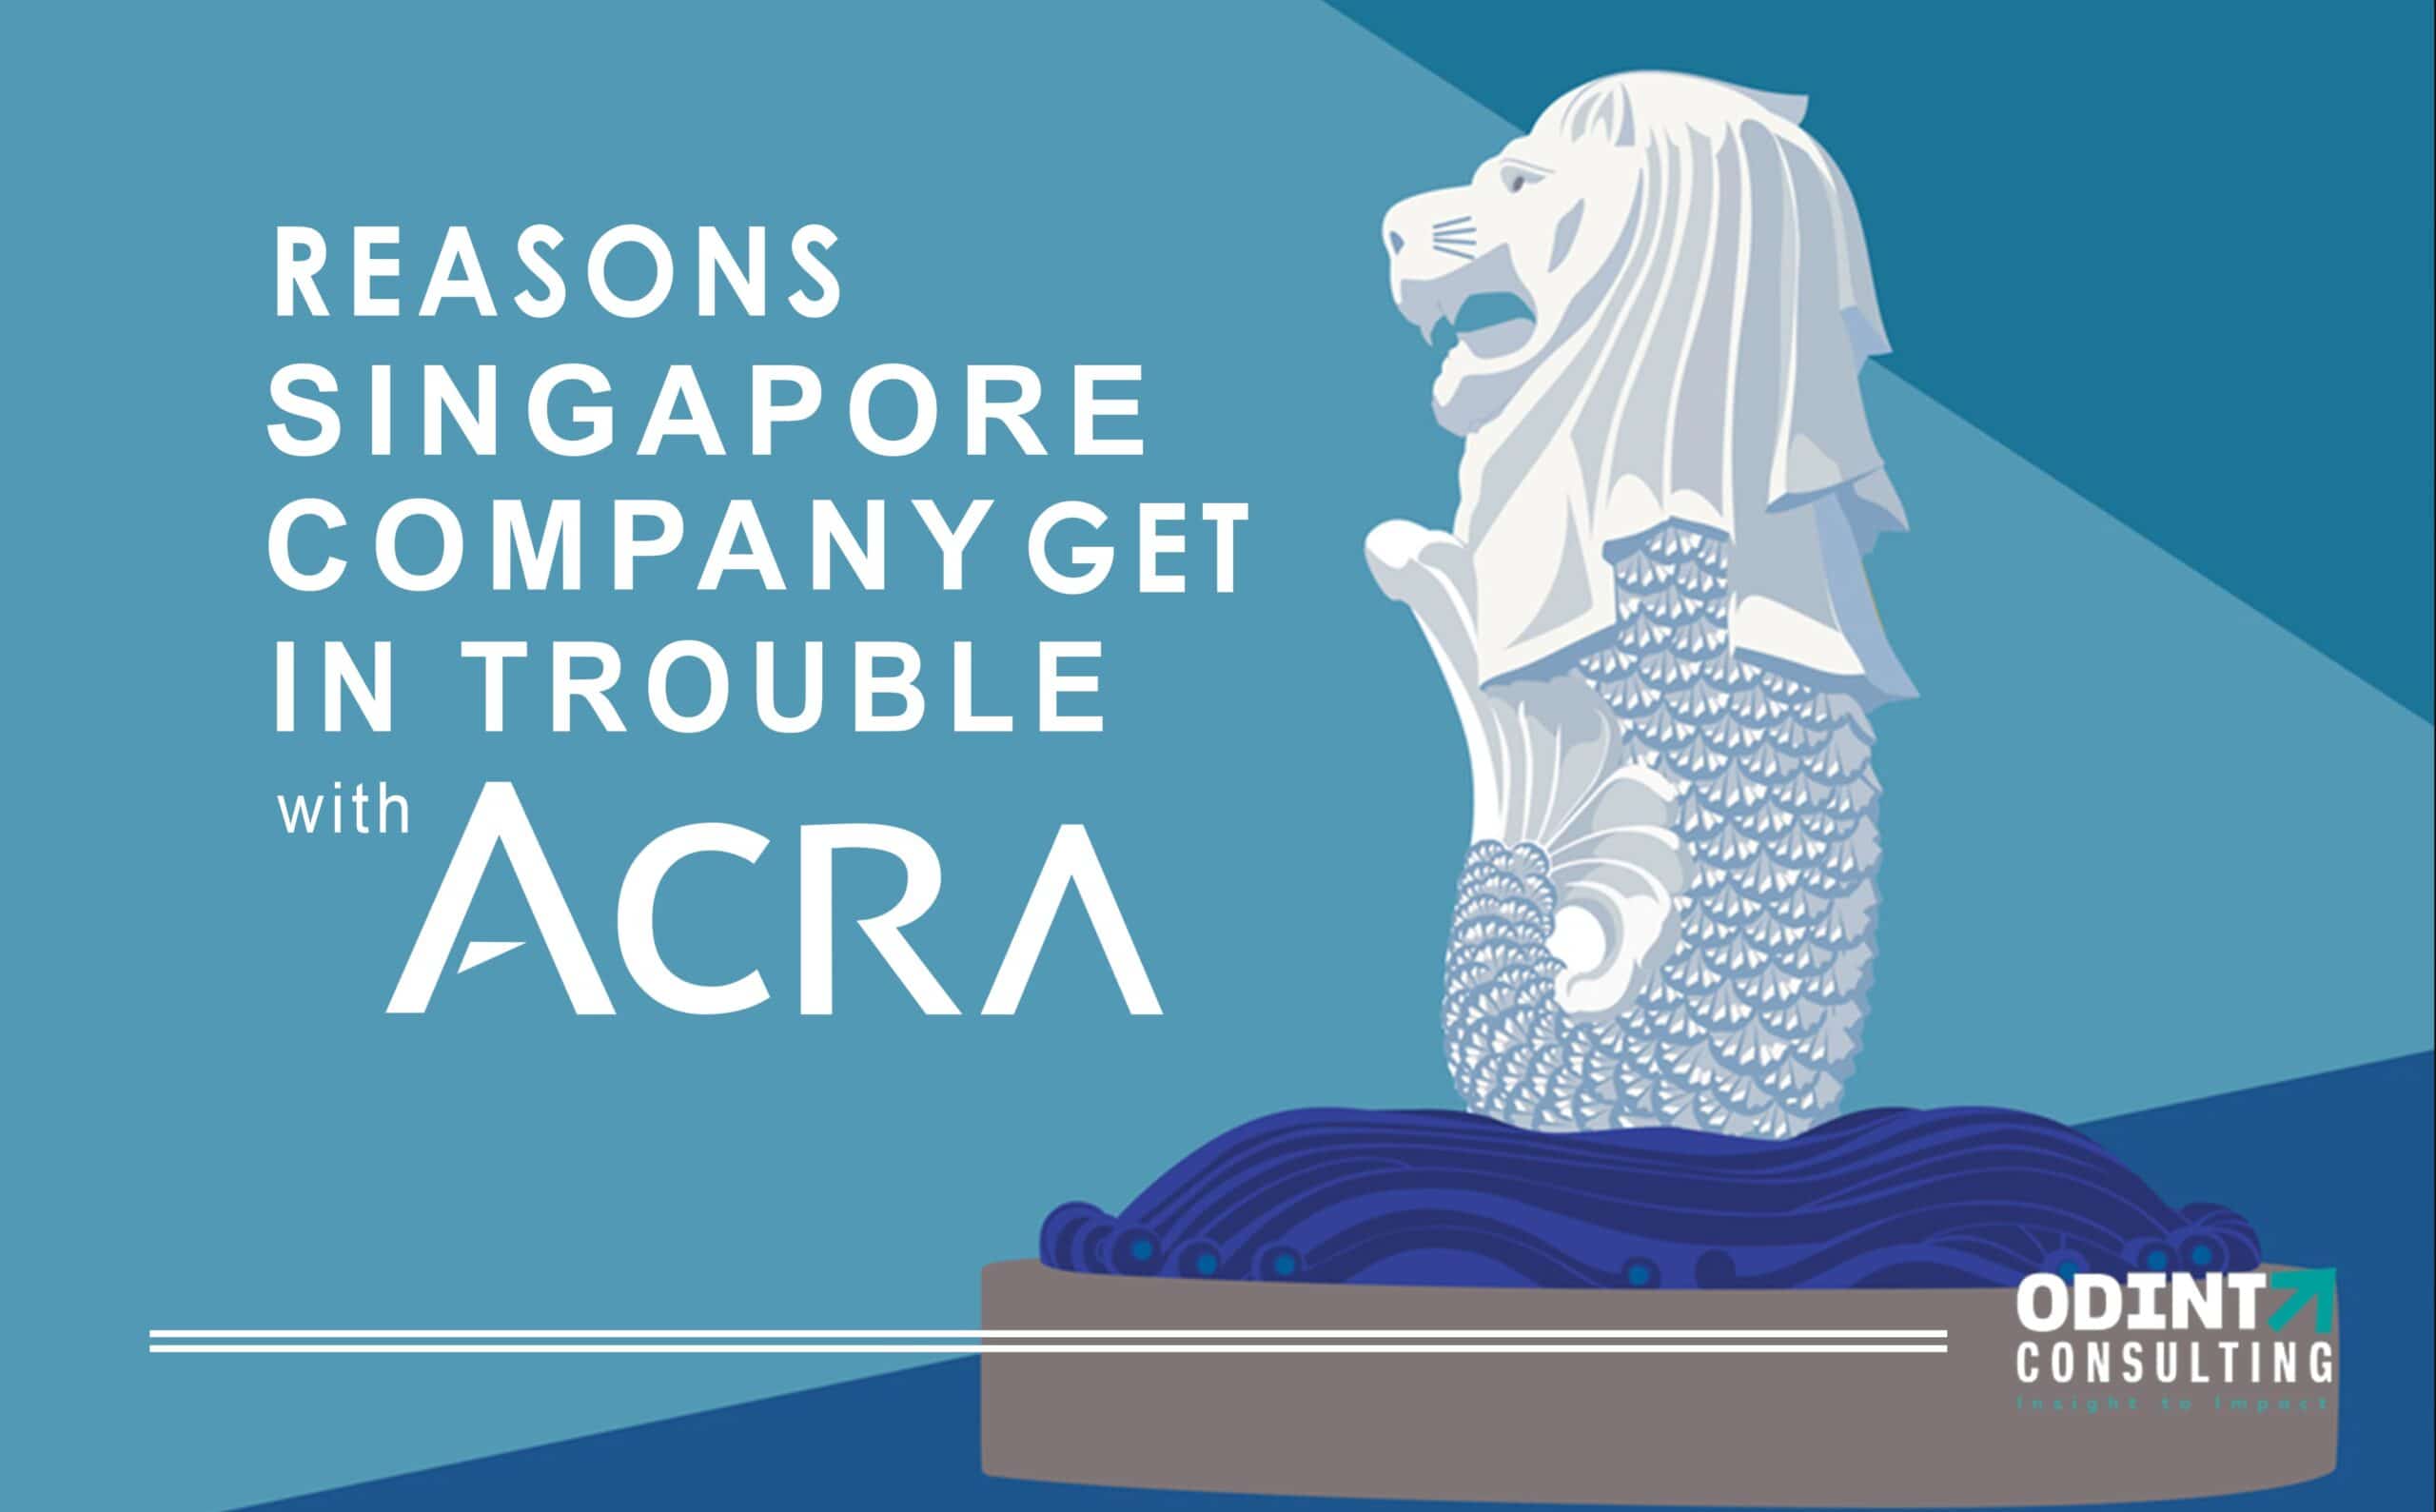 Reasons Singapore Company get in trouble with ACRA